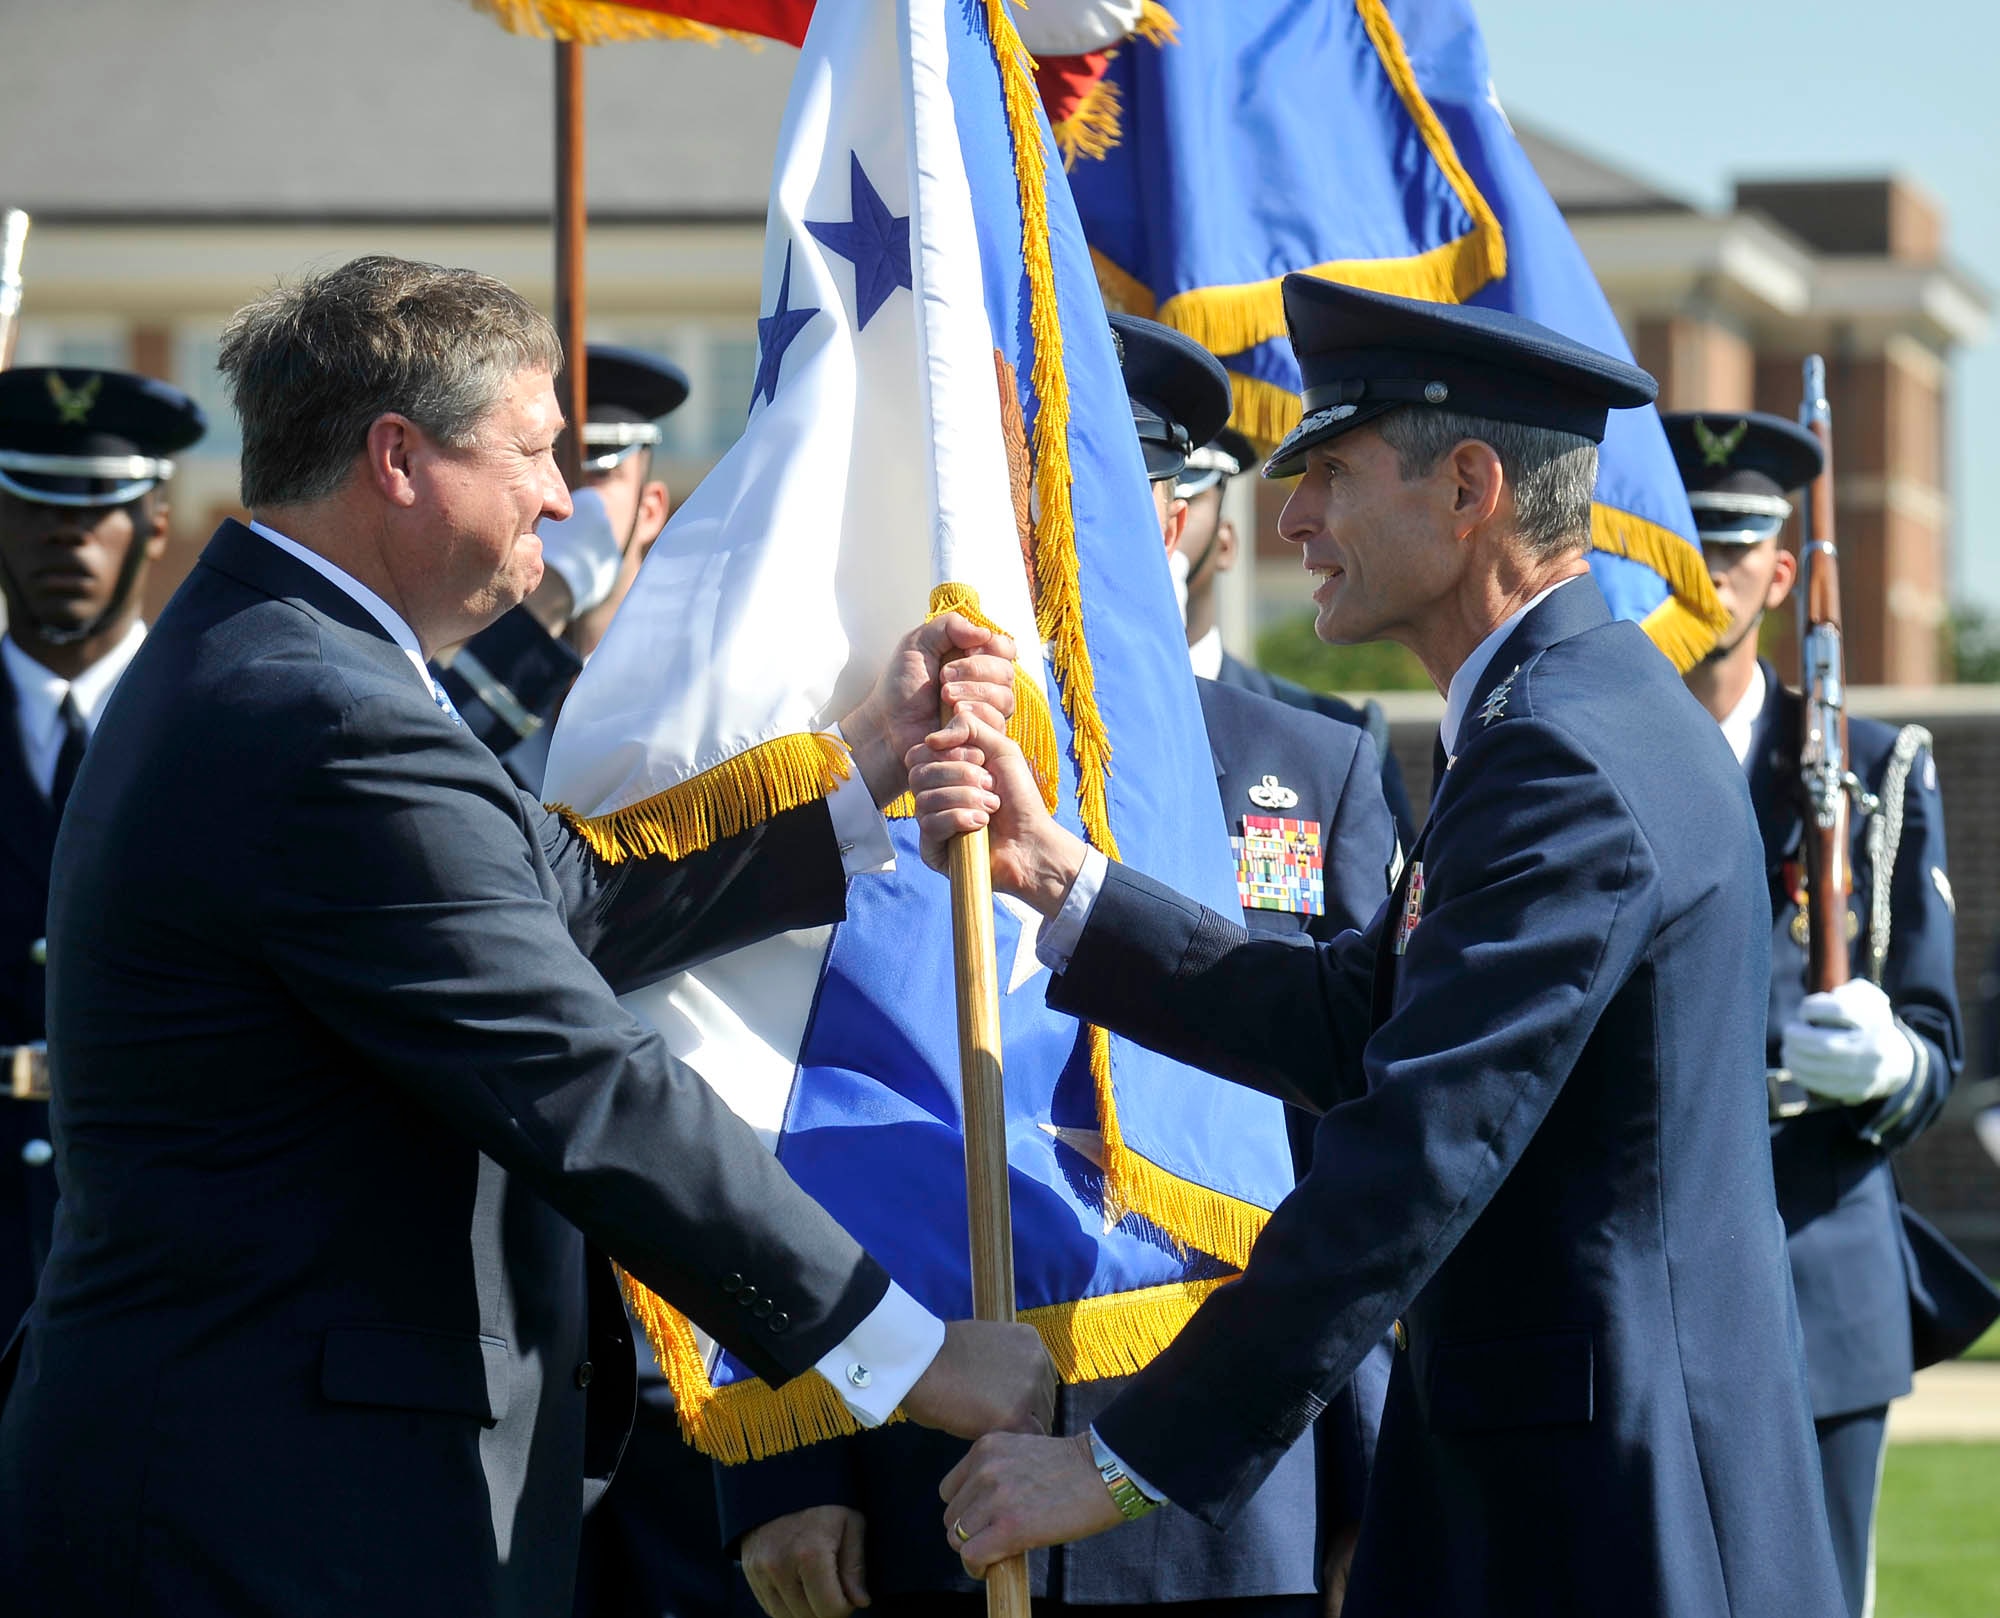 Gen. Norton A. Schwartz accepts the Air Force flag from Acting Secretary of the Air Force Michael B. Donley Aug. 12 during a welcoming ceremony at Bolling Air Force Base D.C., in honor of General Schwartz.  The general is the 19th Air Force chief of staff.  (U.S. Air Force photo/Scott M. Ash) 